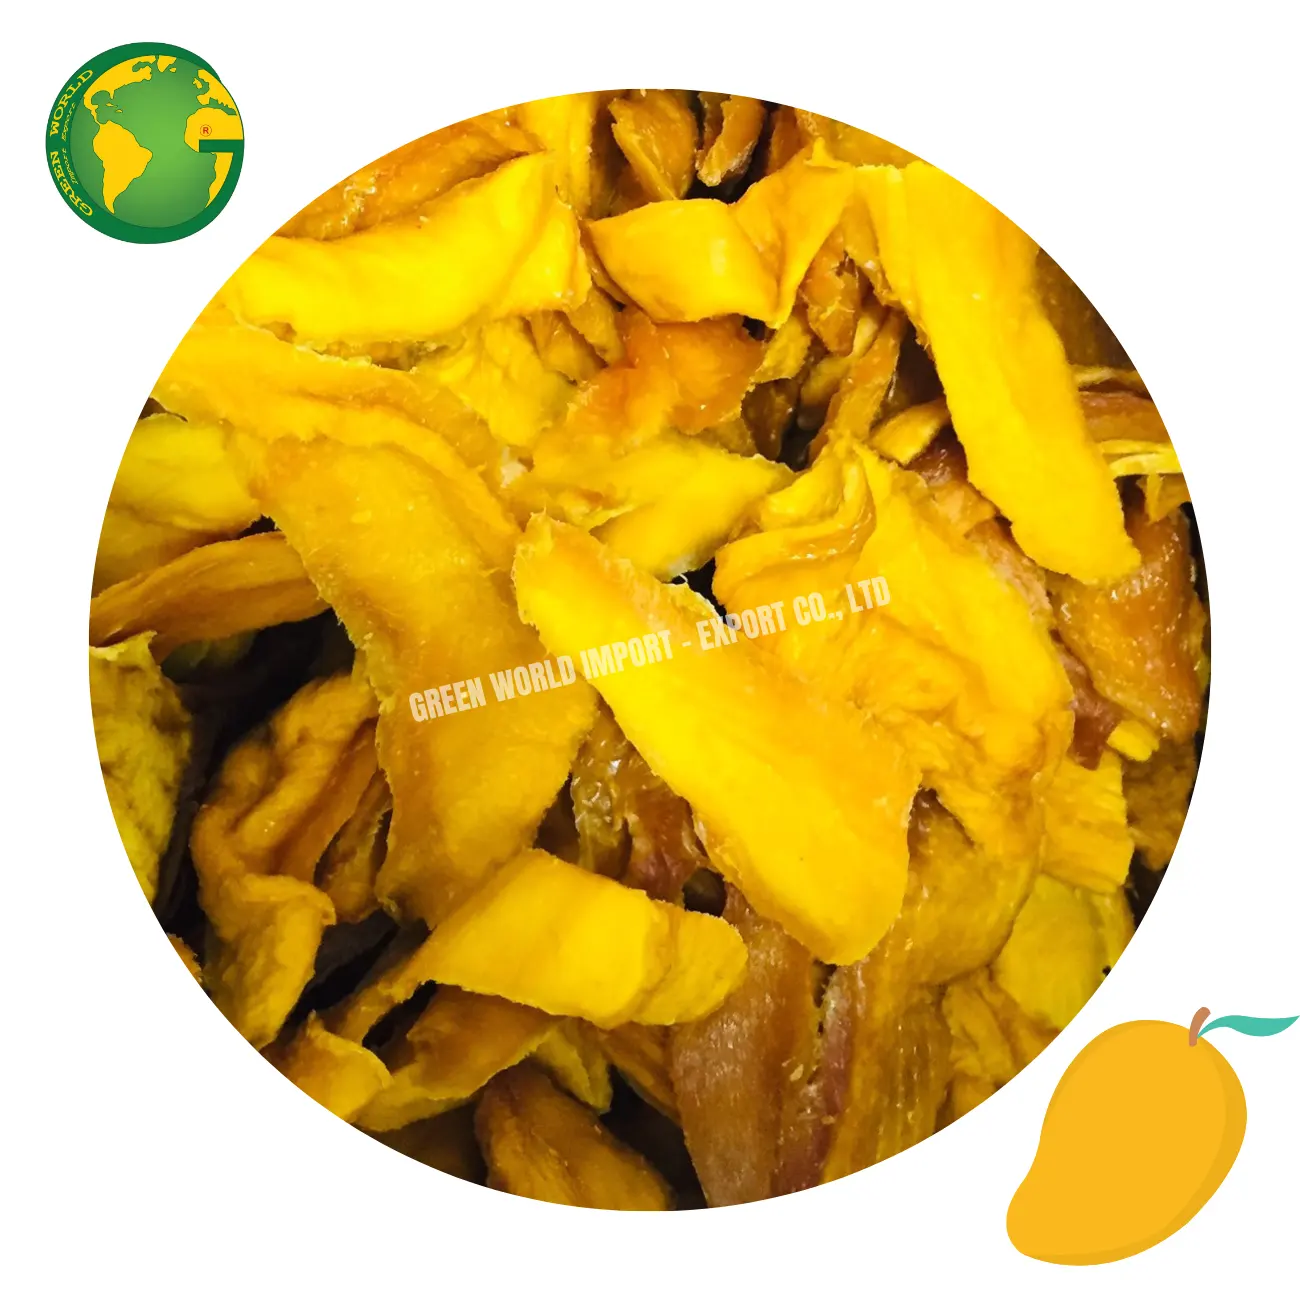 WHOLESALE SNACK DRIED MANGO NATURAL CANDIED FRUIT DEHYDRATED MANGO - DRIED FRUITS VEGETABLES WITH HIGHT QUALITY